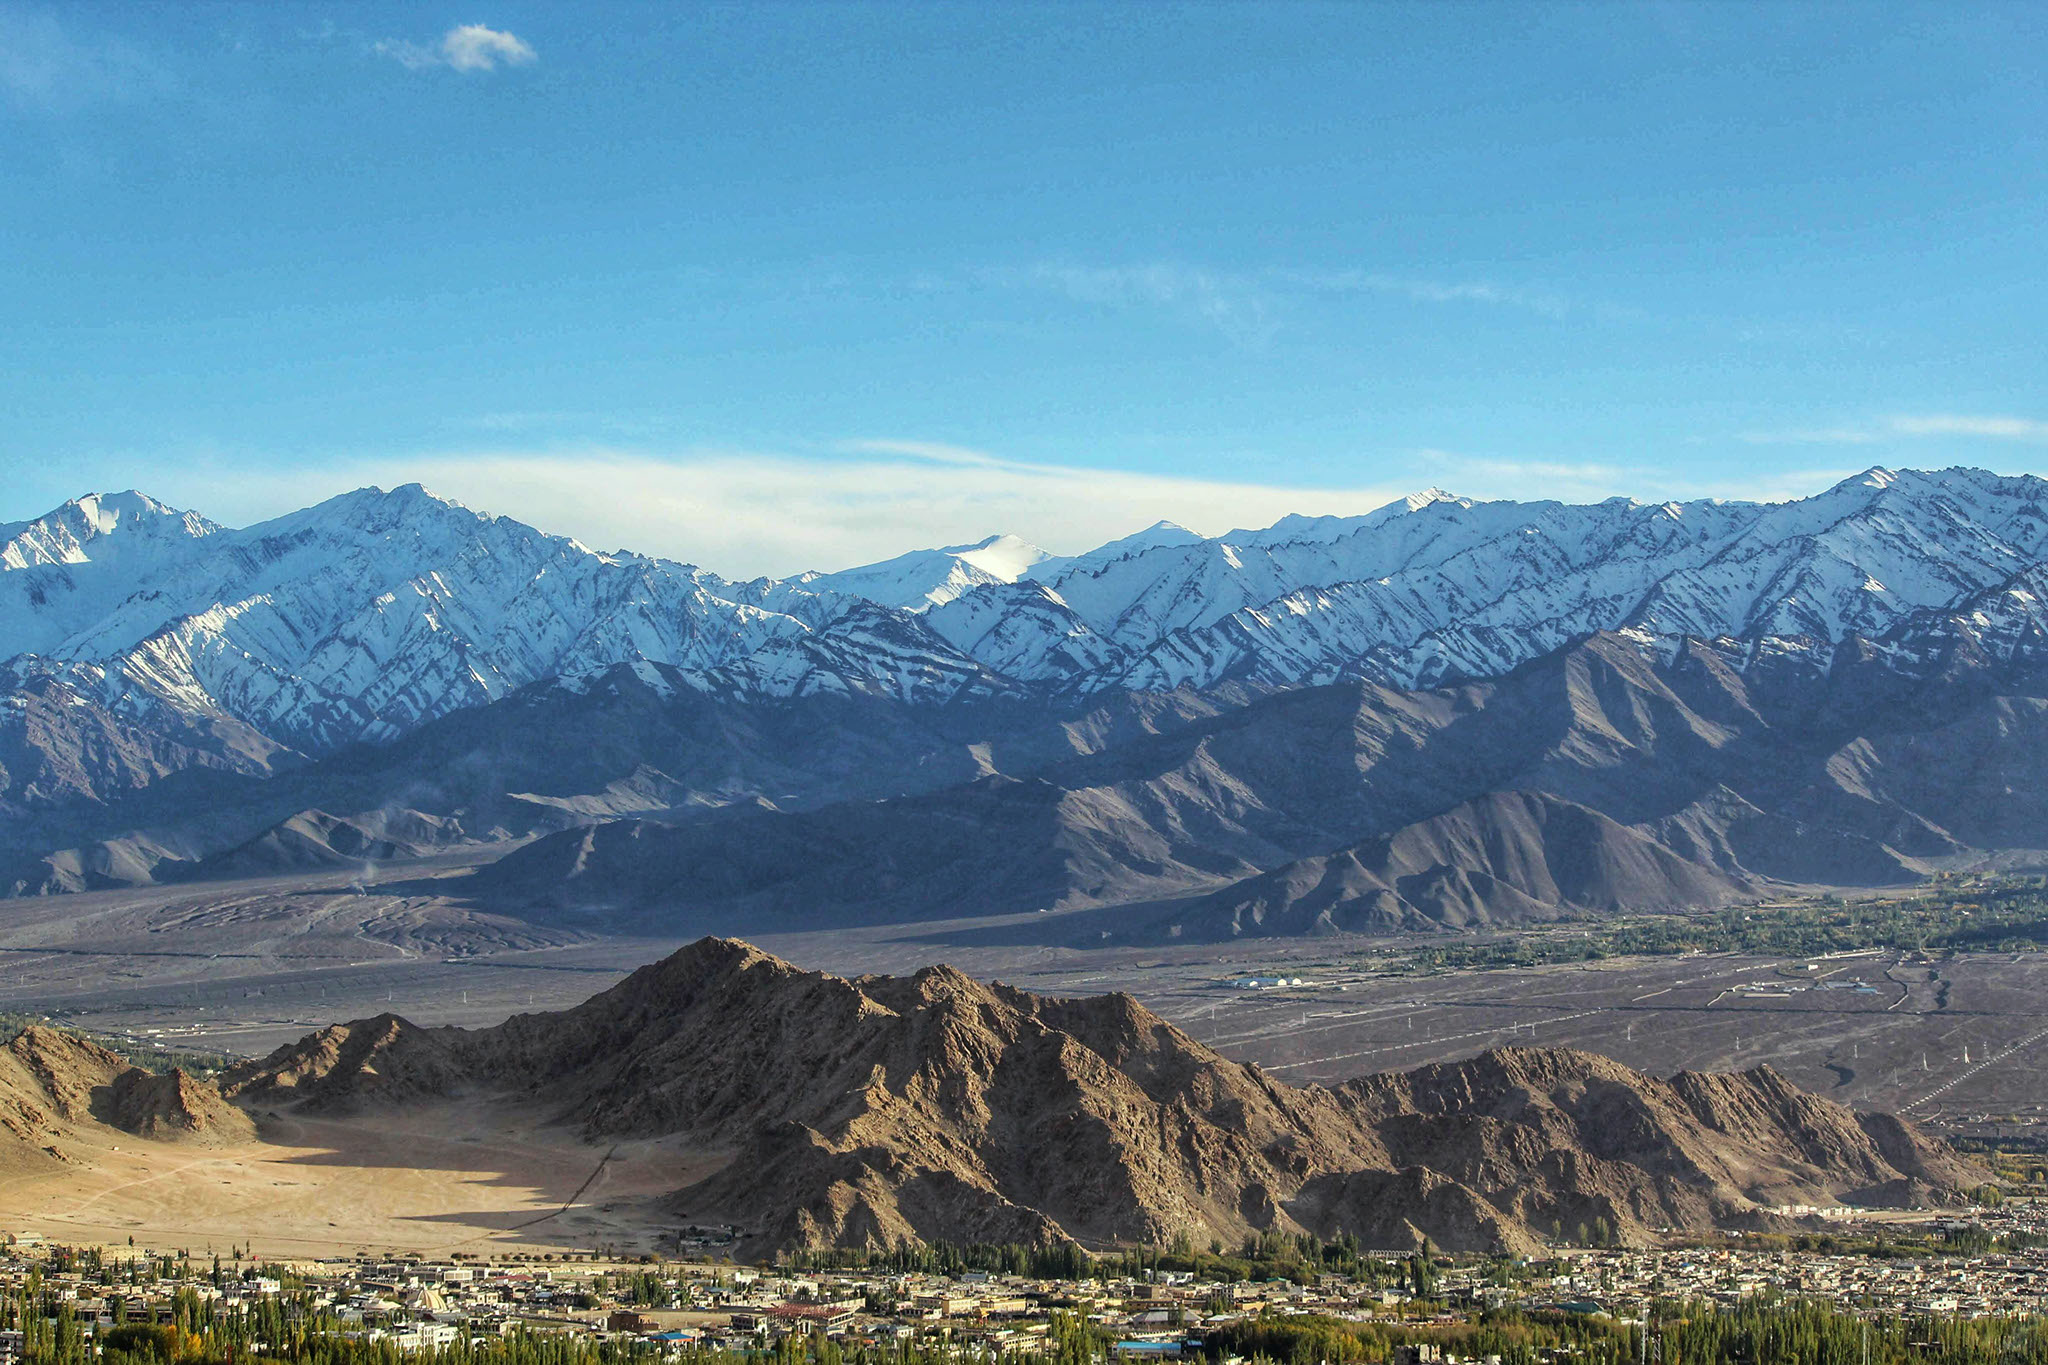 Himalayan mountains resembling the crease on white and brown silhouette in Ladakh